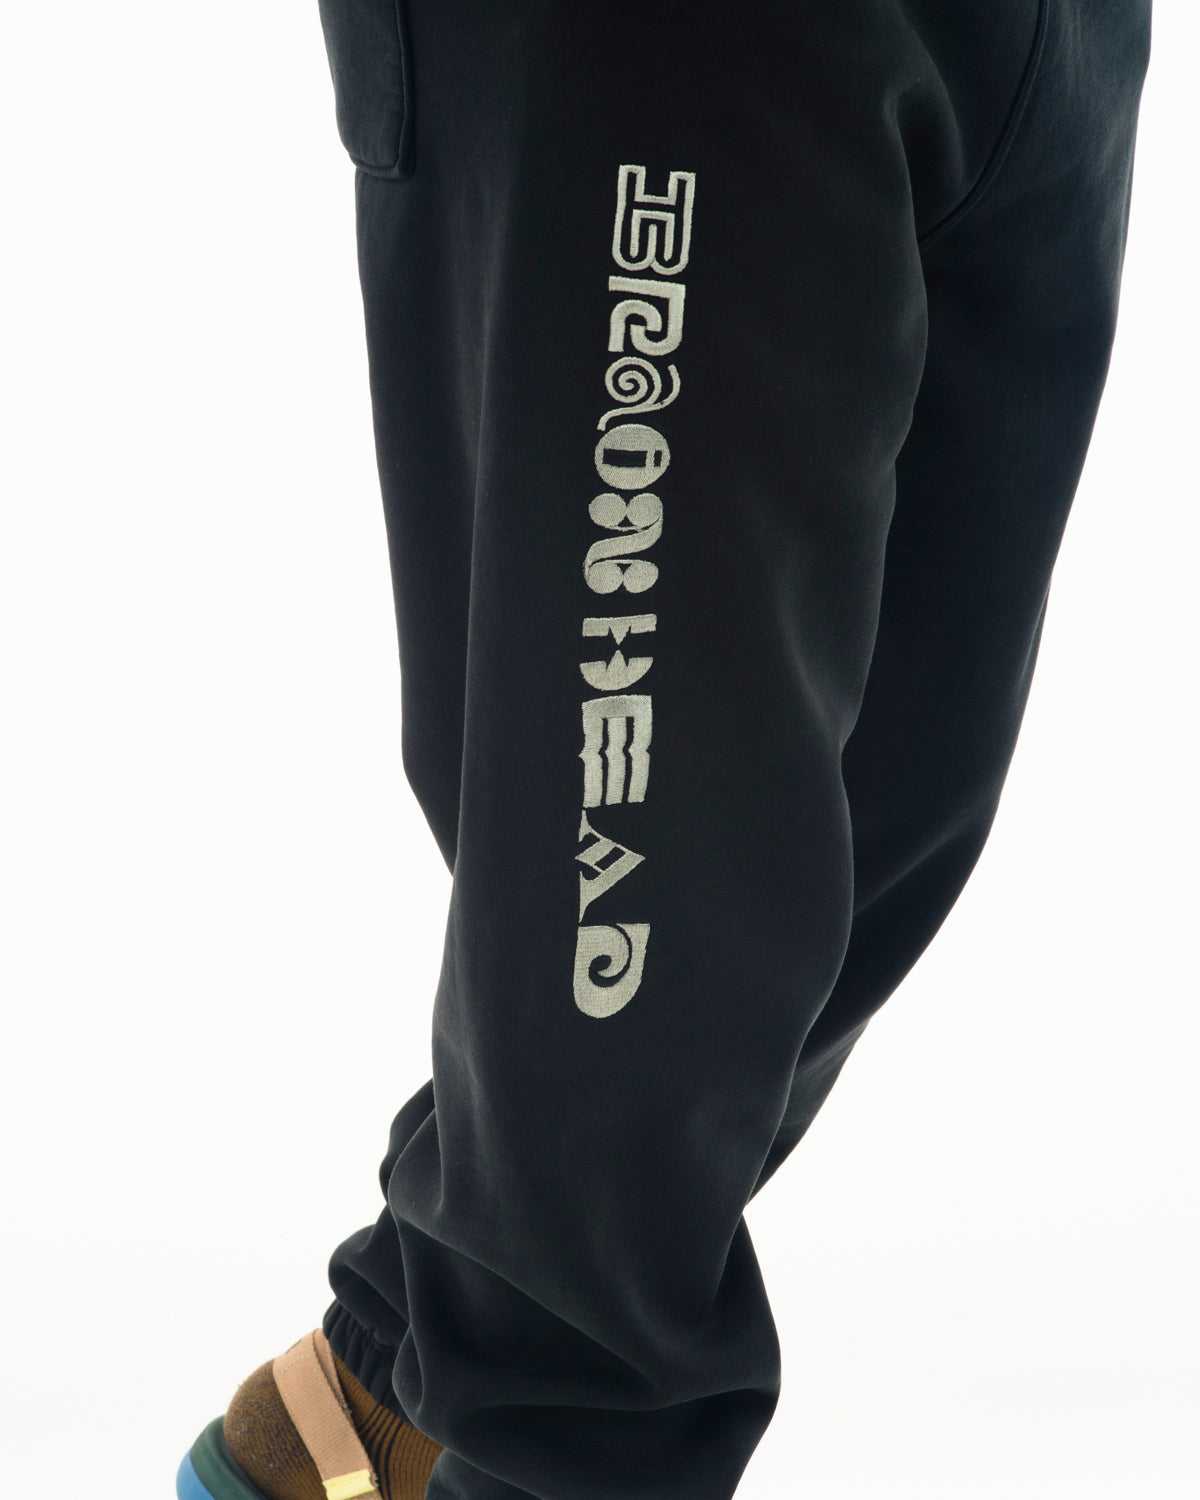 Heavyweight Embroidered Sweatpants - Black 6